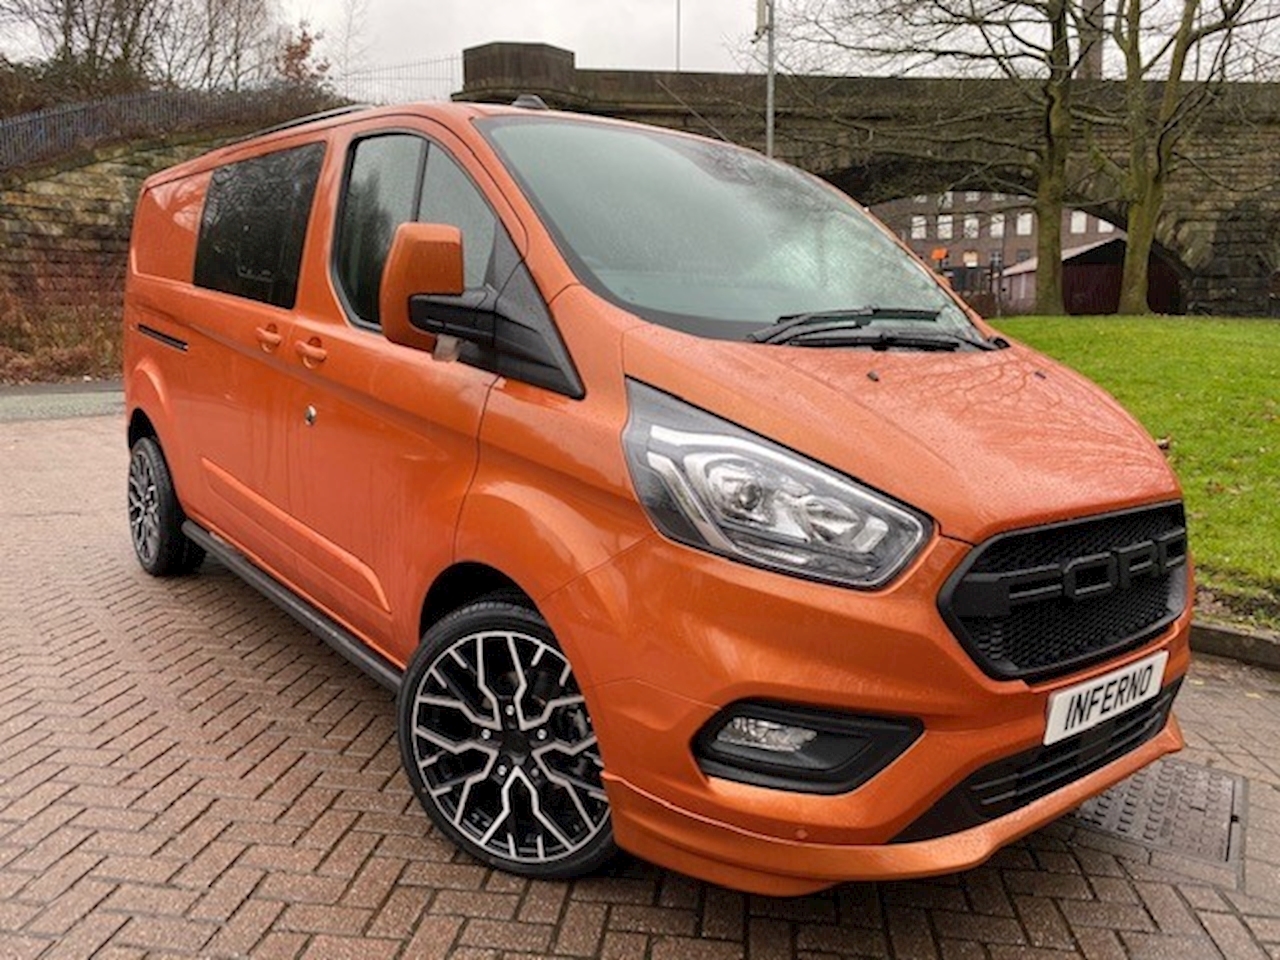 New 2021 Transit Custom Limited 2.0 5dr Combi Van Auto Diesel For Sale in Manchester | V2L Limited